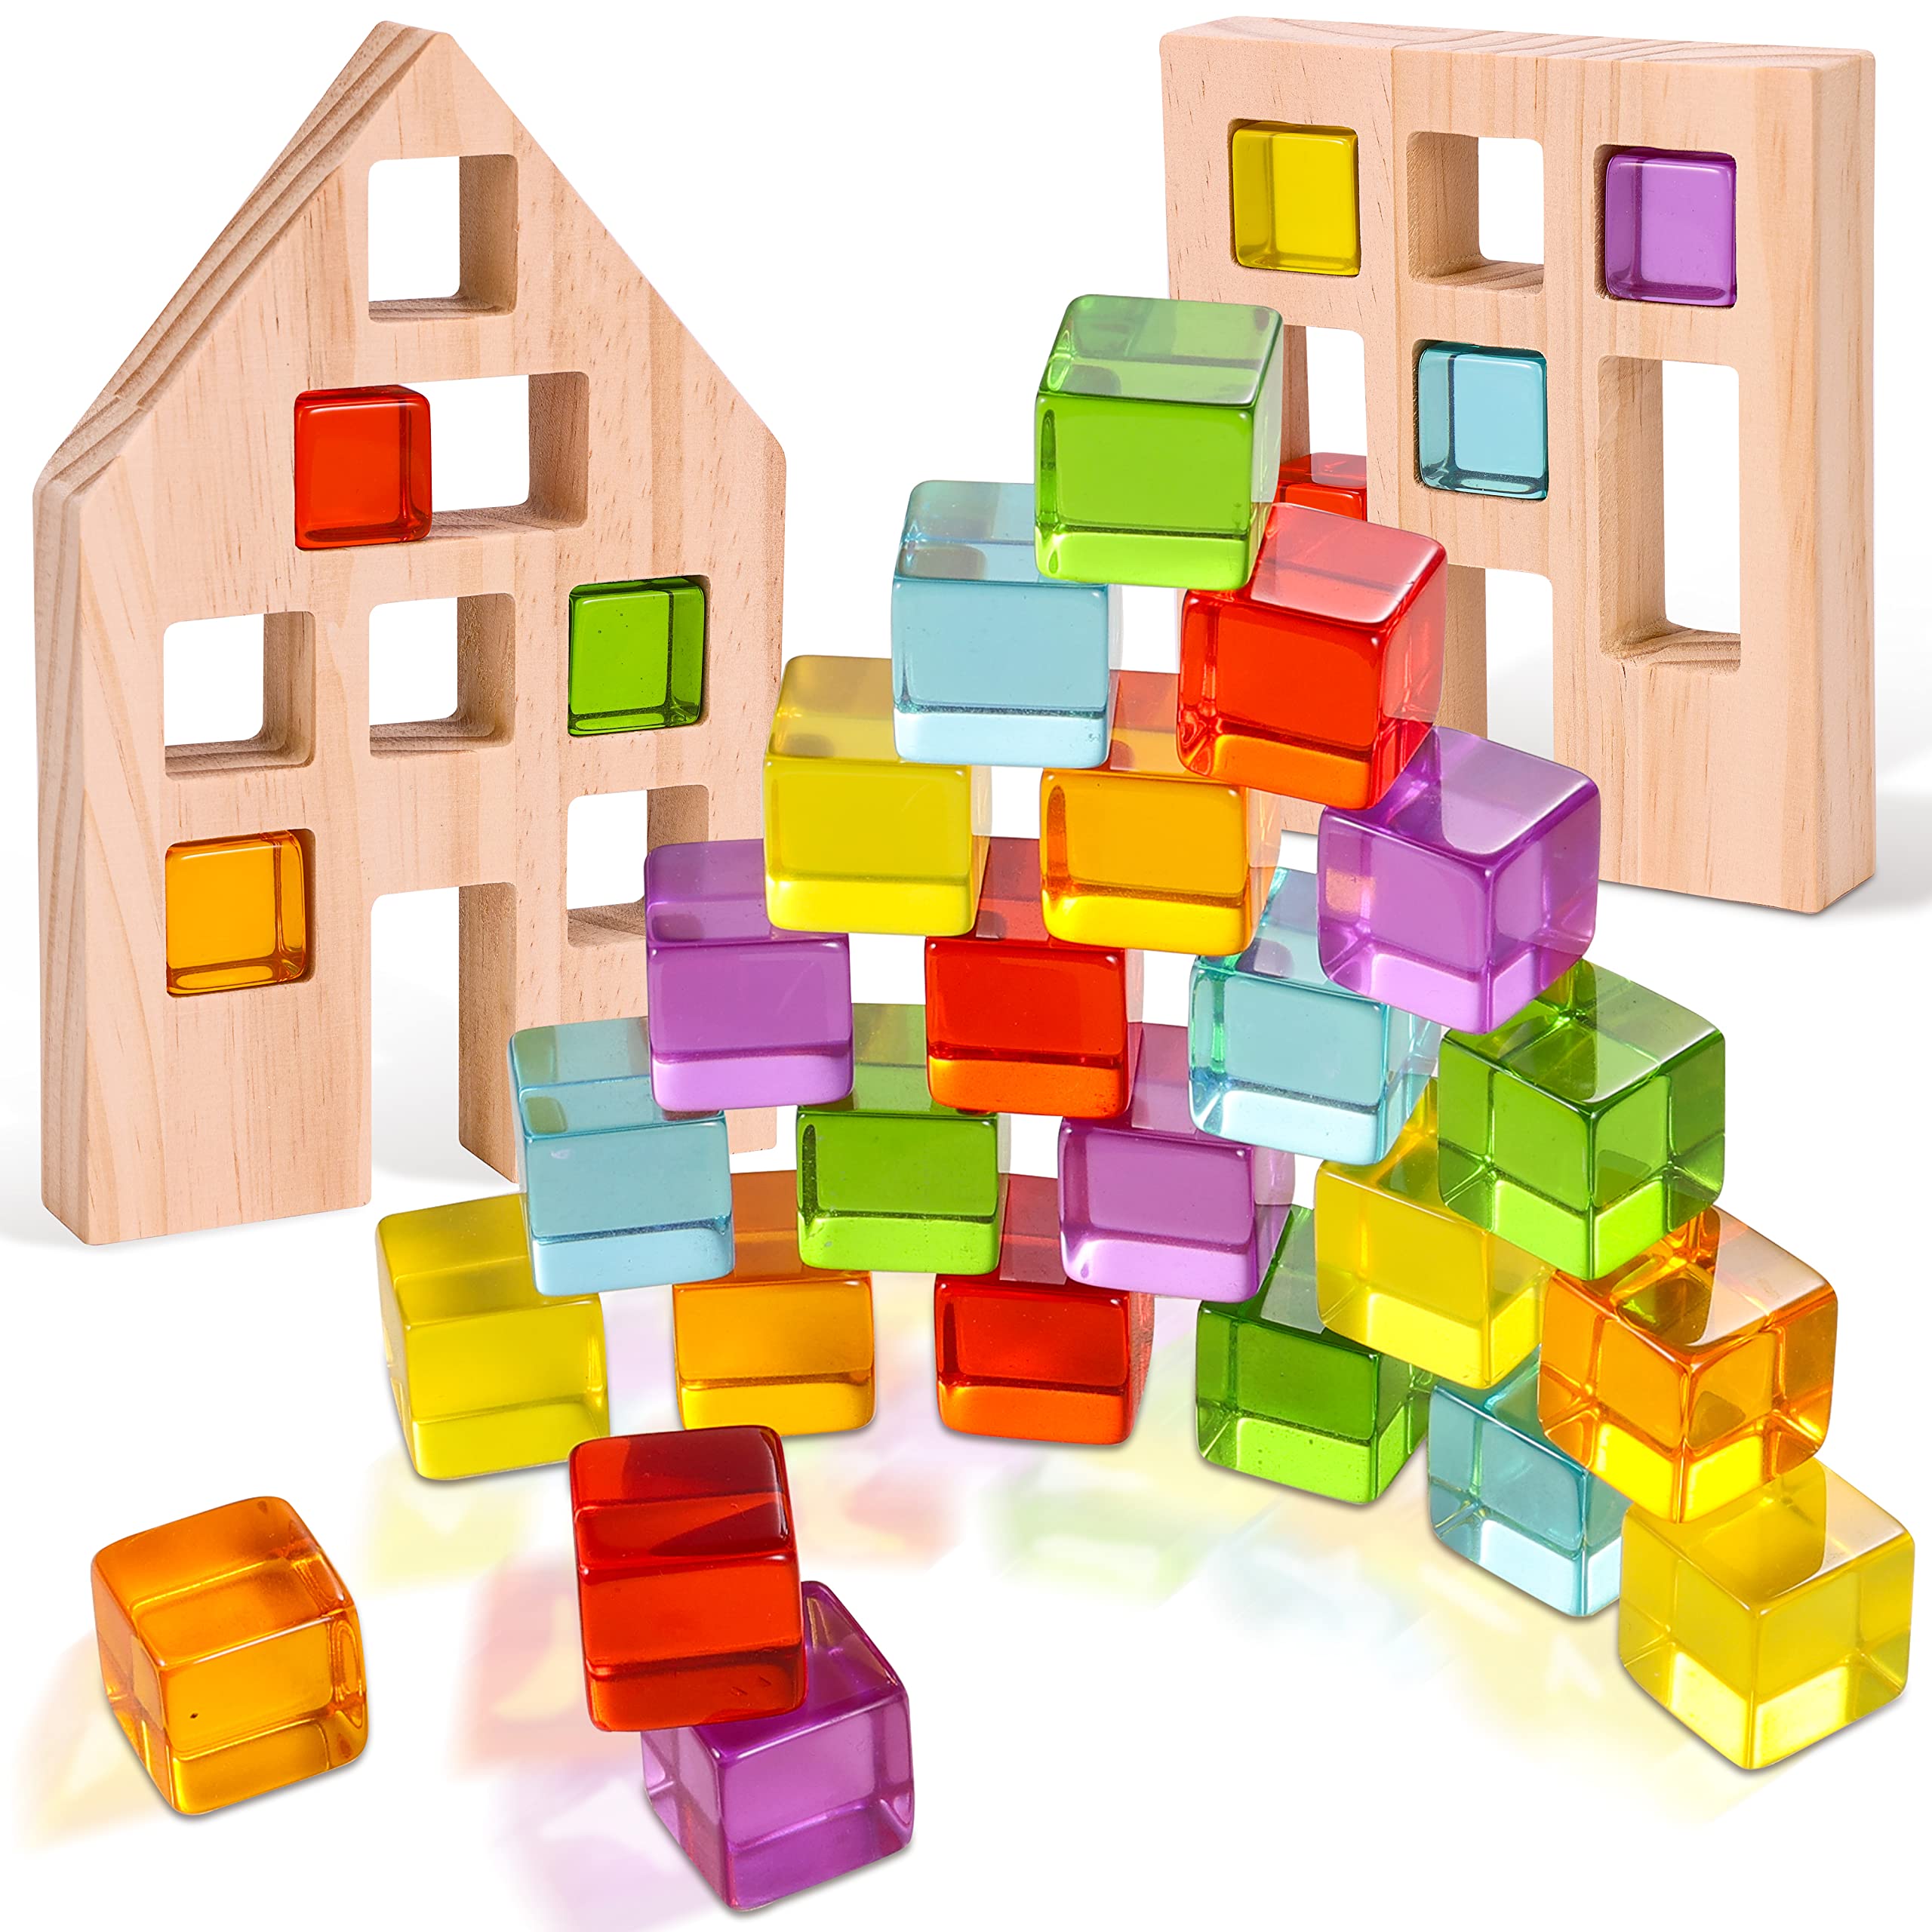 Woodtoe Wooden Building Blocks Set for Kids, 24 PCS Rainbow Gem Cubes Stacking Blocks - 2 Wood House, Montessori Stacking Toy for Toddlers, Educational Preschool STEM Birthday Gift for Boys Girls 3-6